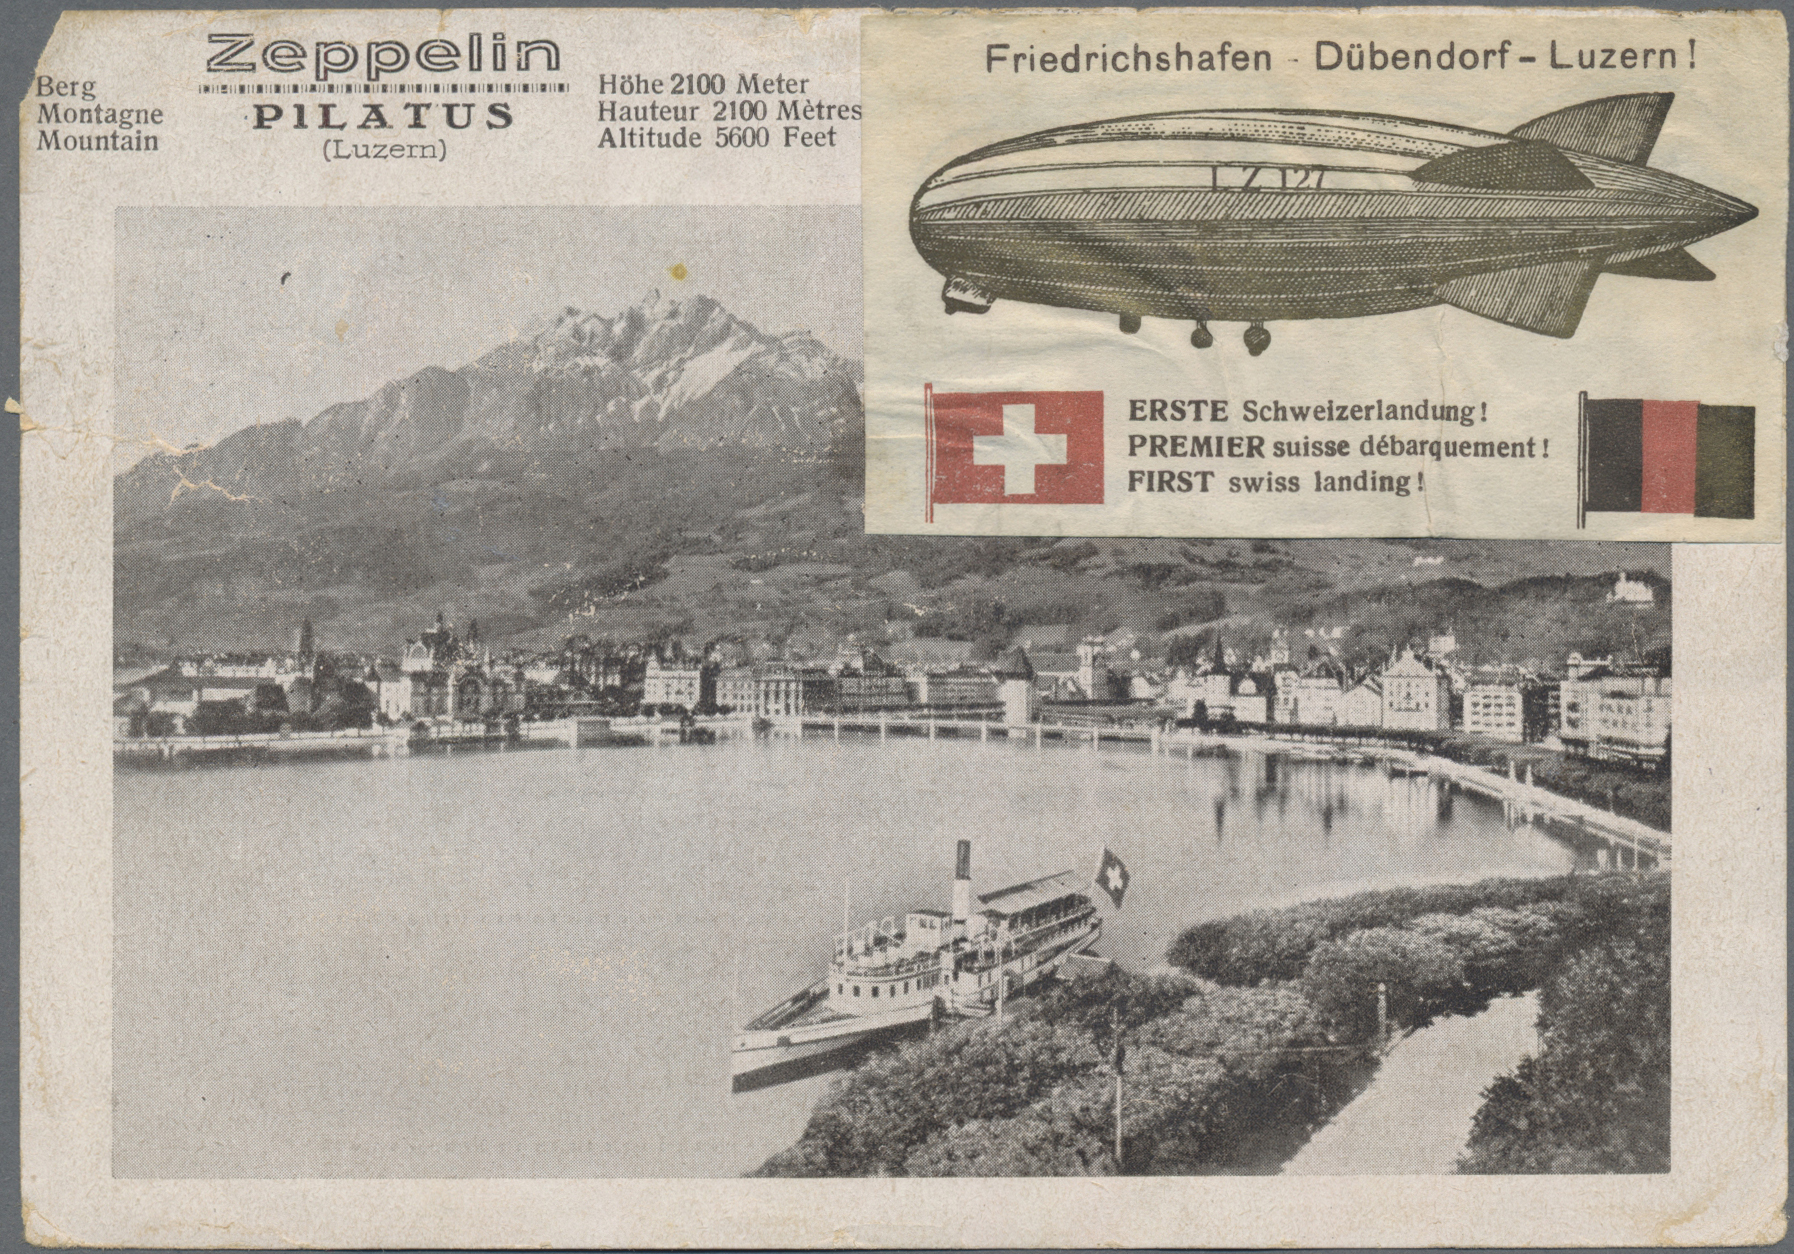 Lot 8026 - zeppelinpost europa  -  Auktionshaus Christoph Gärtner GmbH & Co. KG 54th AUCTION - Day 4